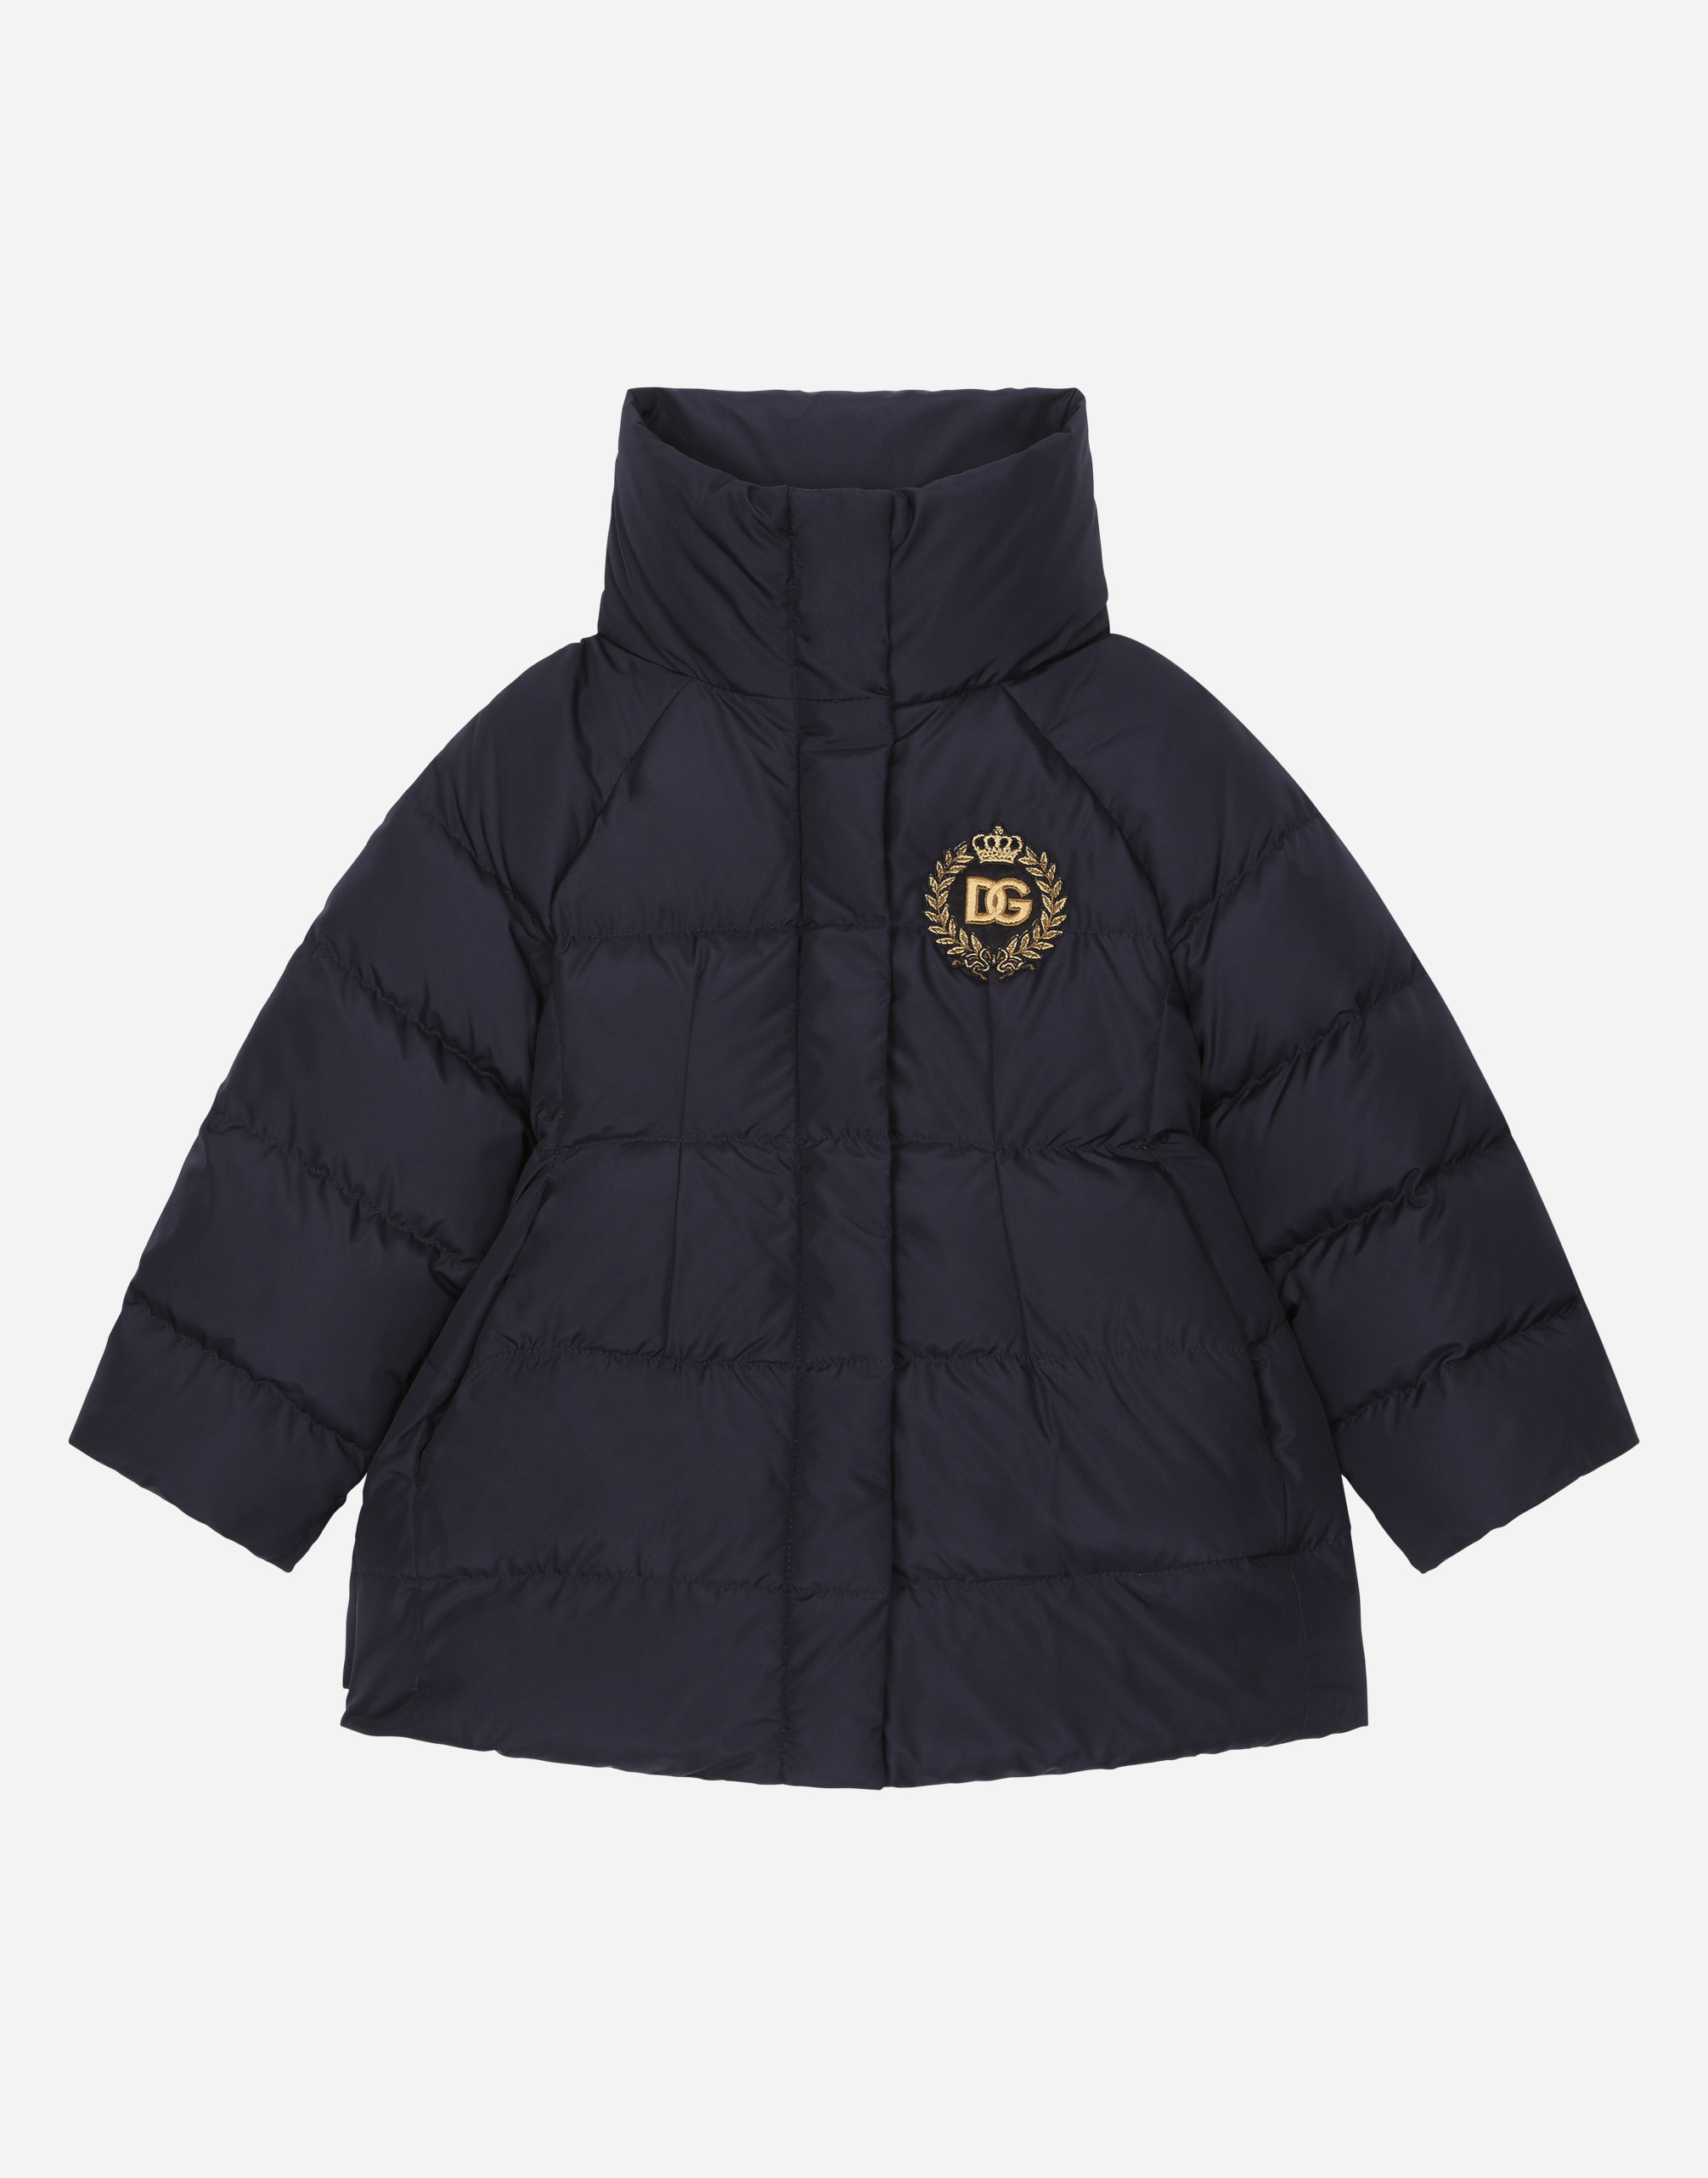 Nylon down jacket with DG logo in Blue